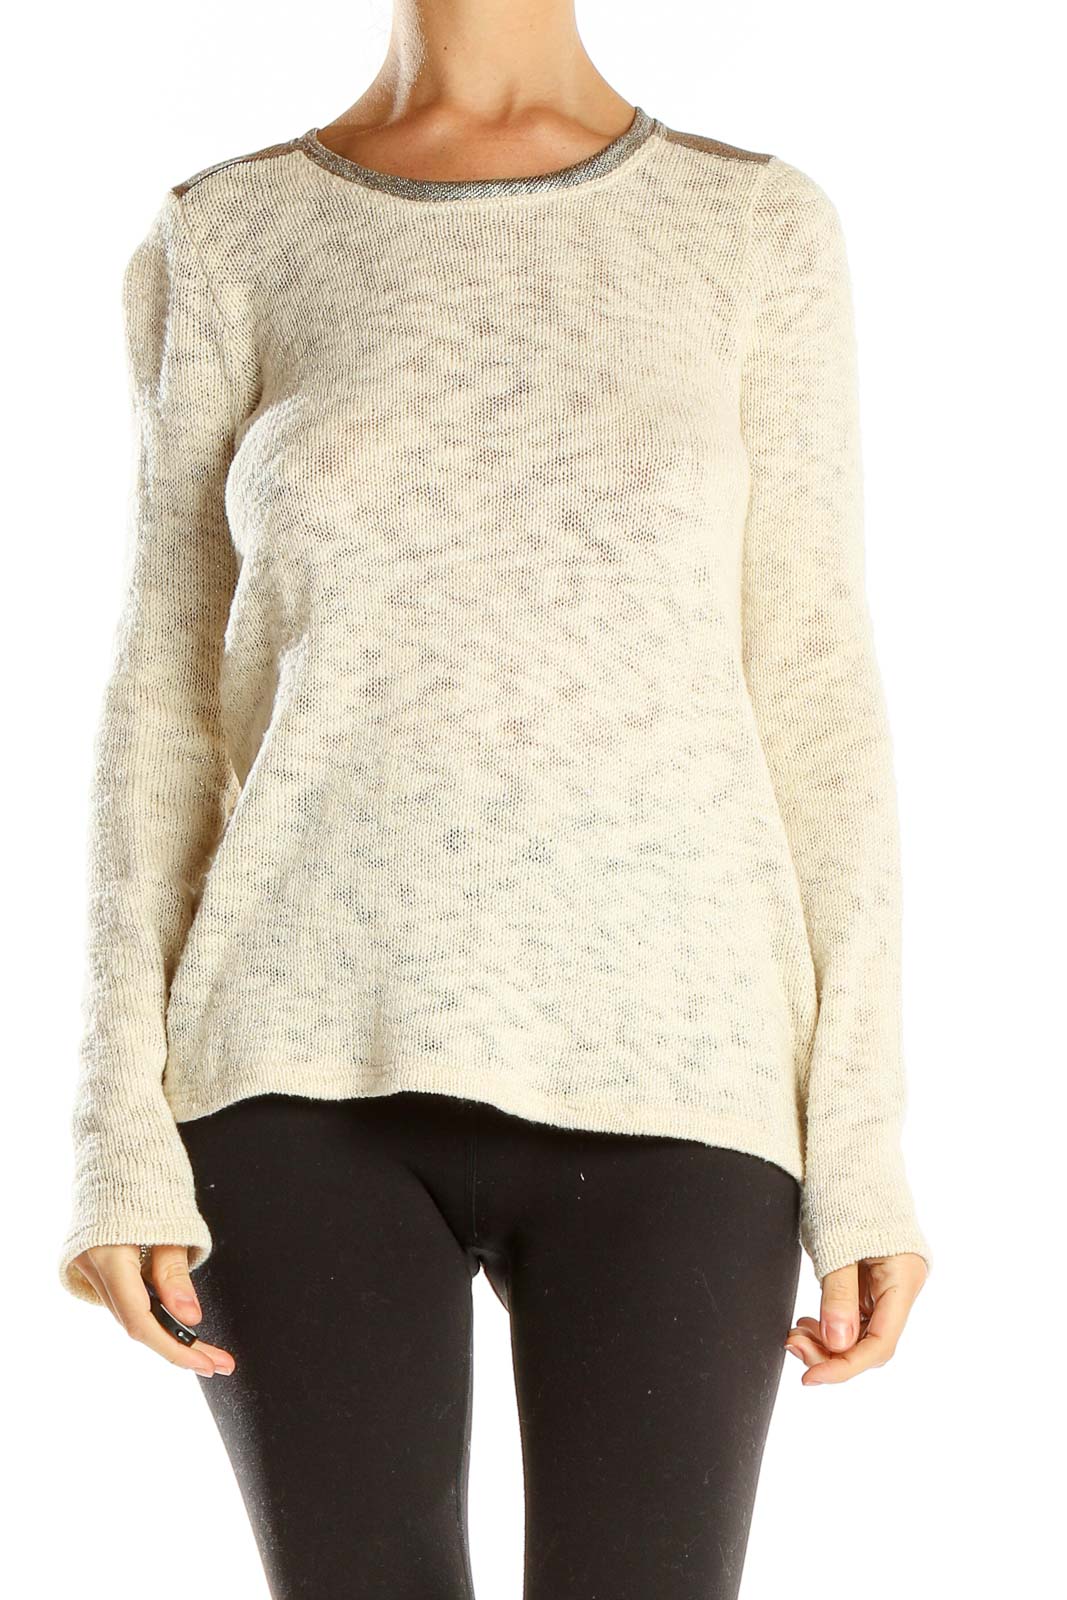 Beige Knit Casual Top Front